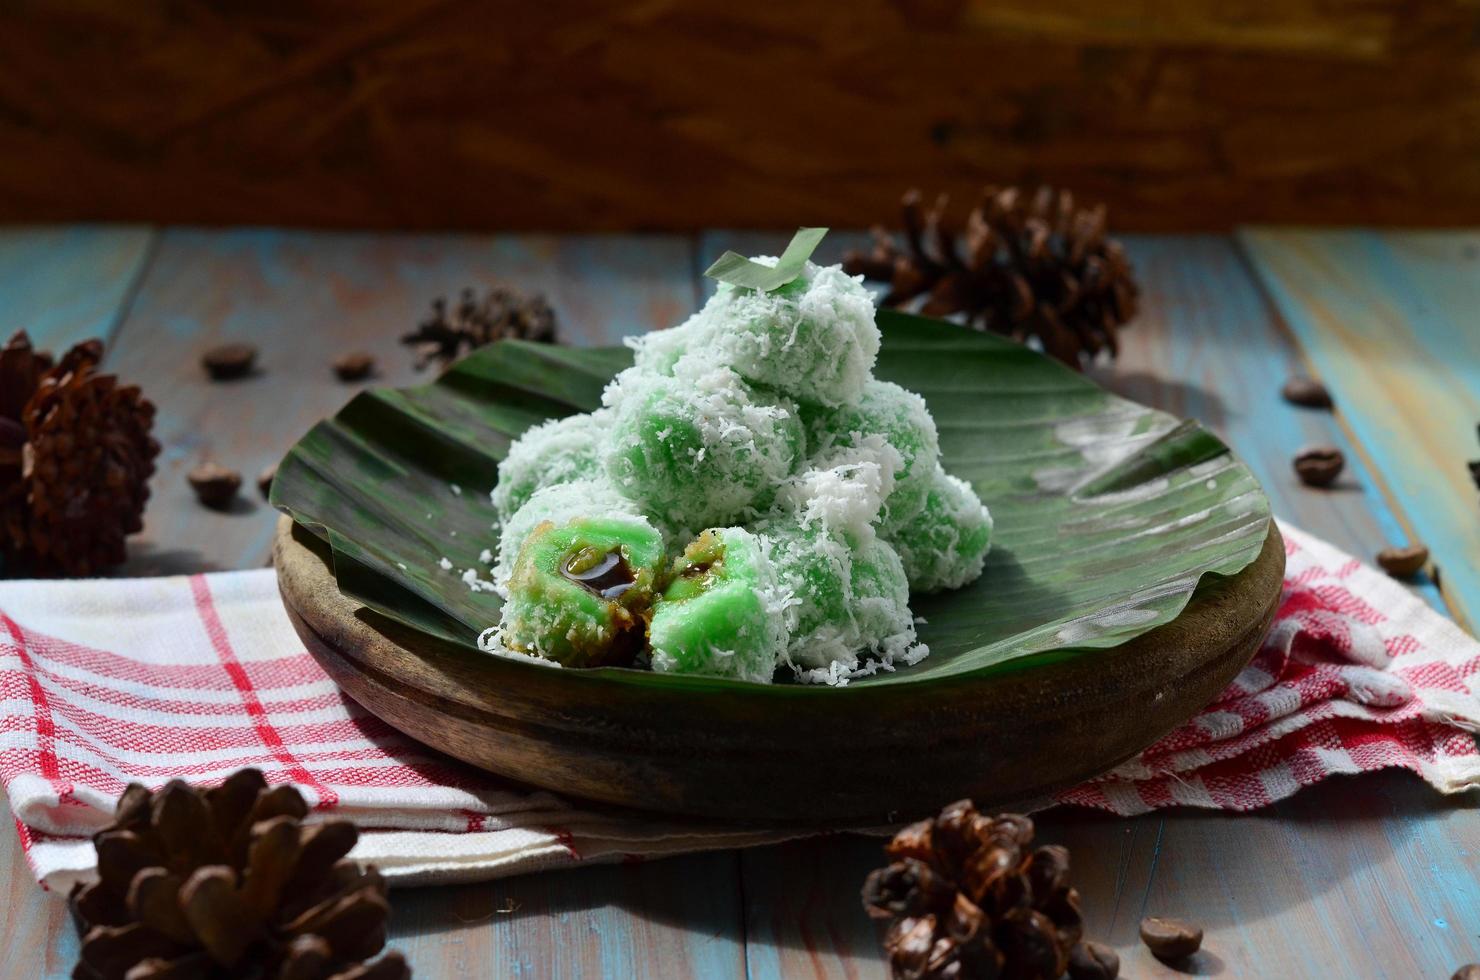 Klepon or kelepon is one of Indonesia's traditional cakes made from glutinous rice flour which is shaped like small balls and filled with brown sugar and then boiled photo